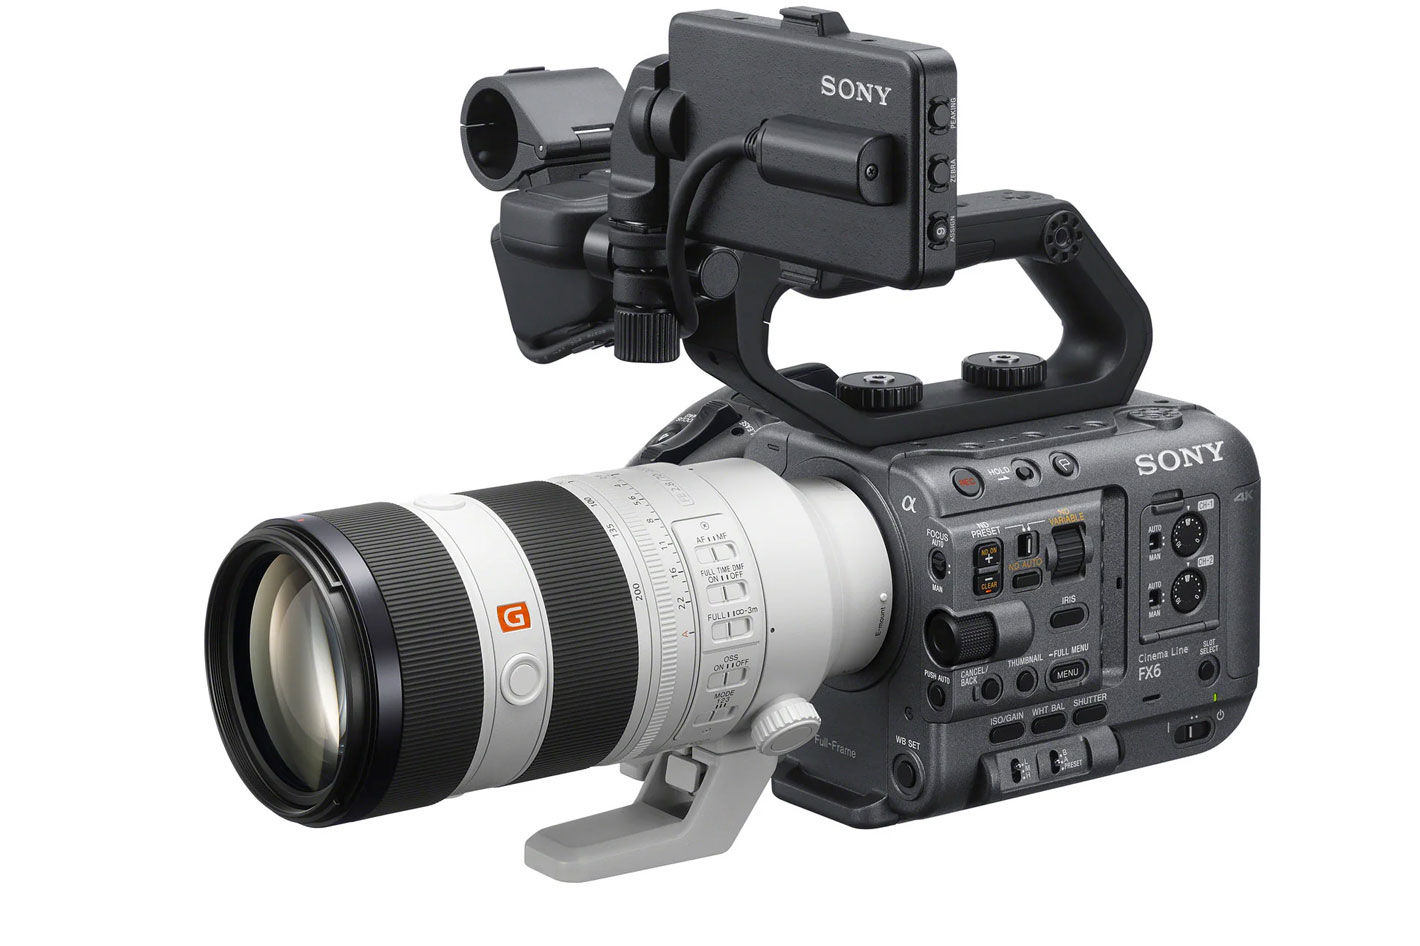 Sony FE 70-200mm F2.8 GM OSS II: a perfect choice for video by Jose Antunes  - ProVideo Coalition